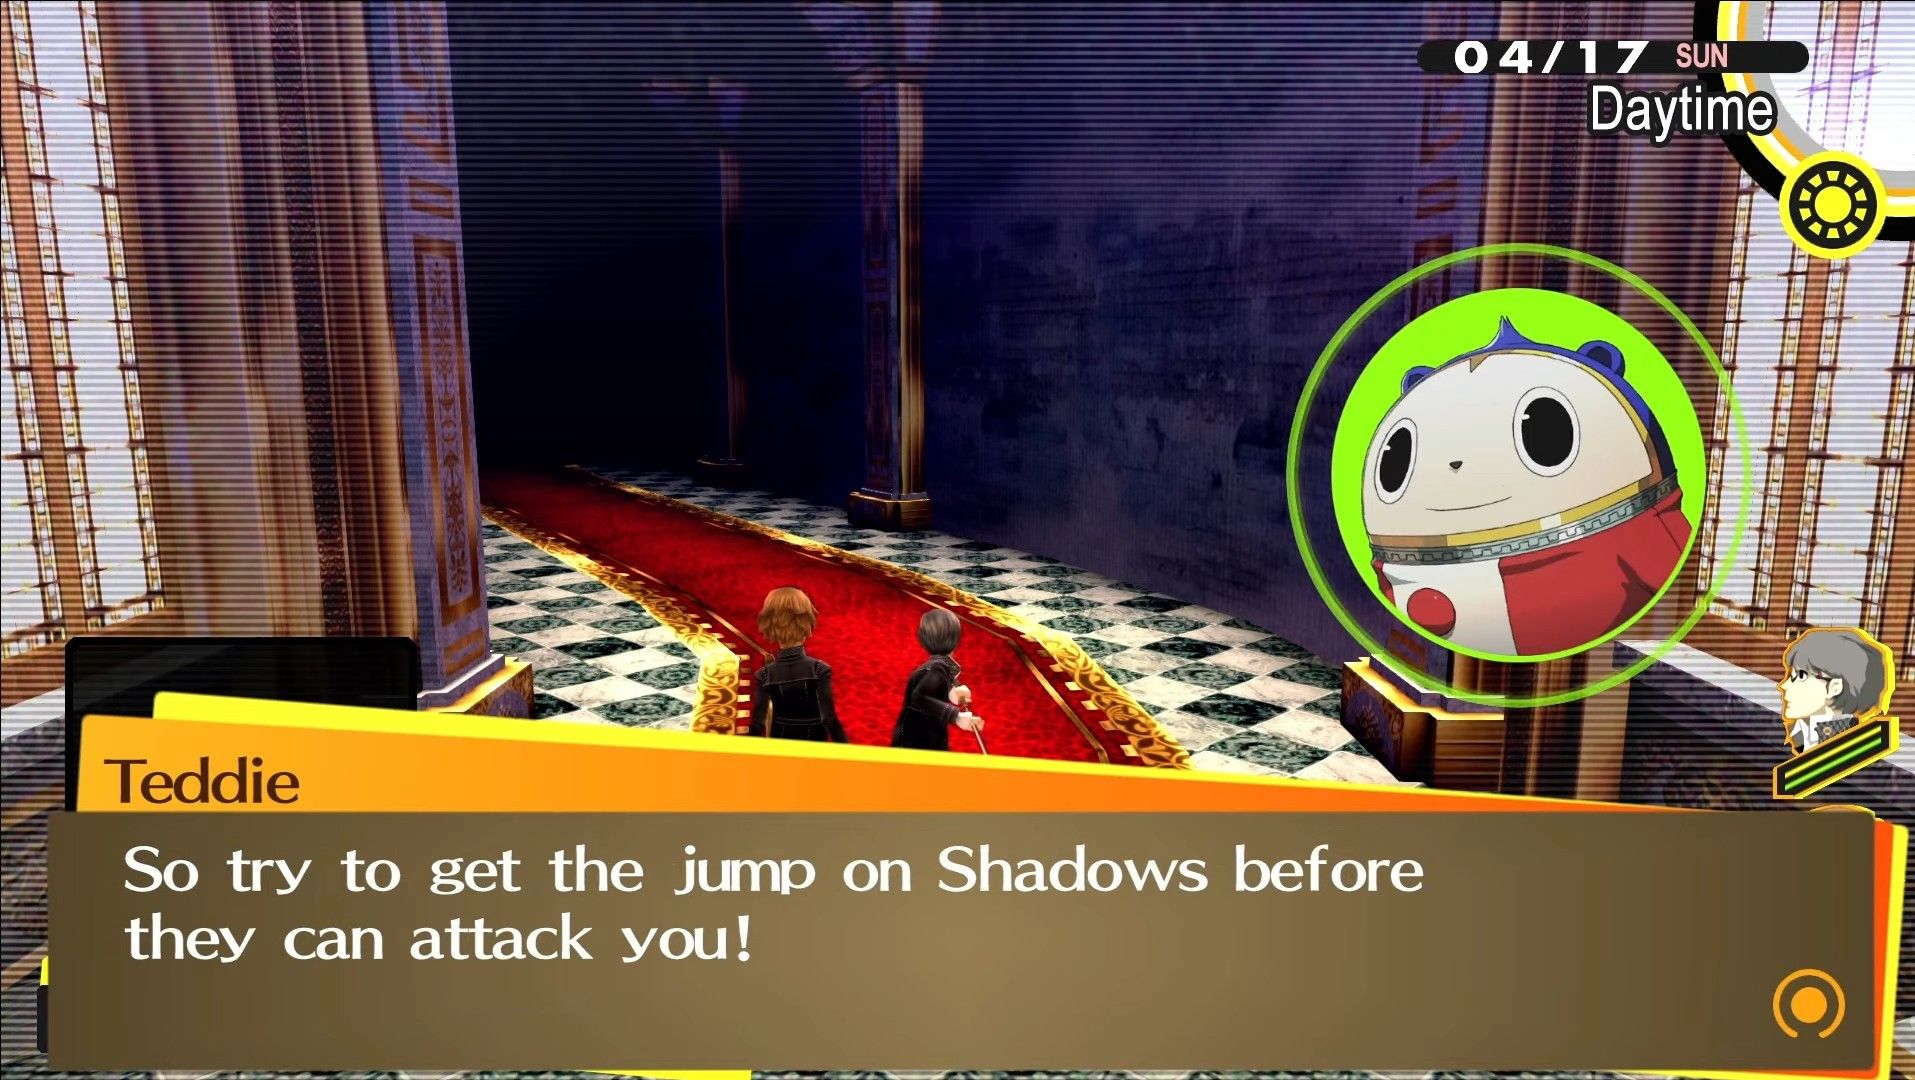 teddie explaining how to sneak up on shadows in yukiko's castle in persona 4 golden